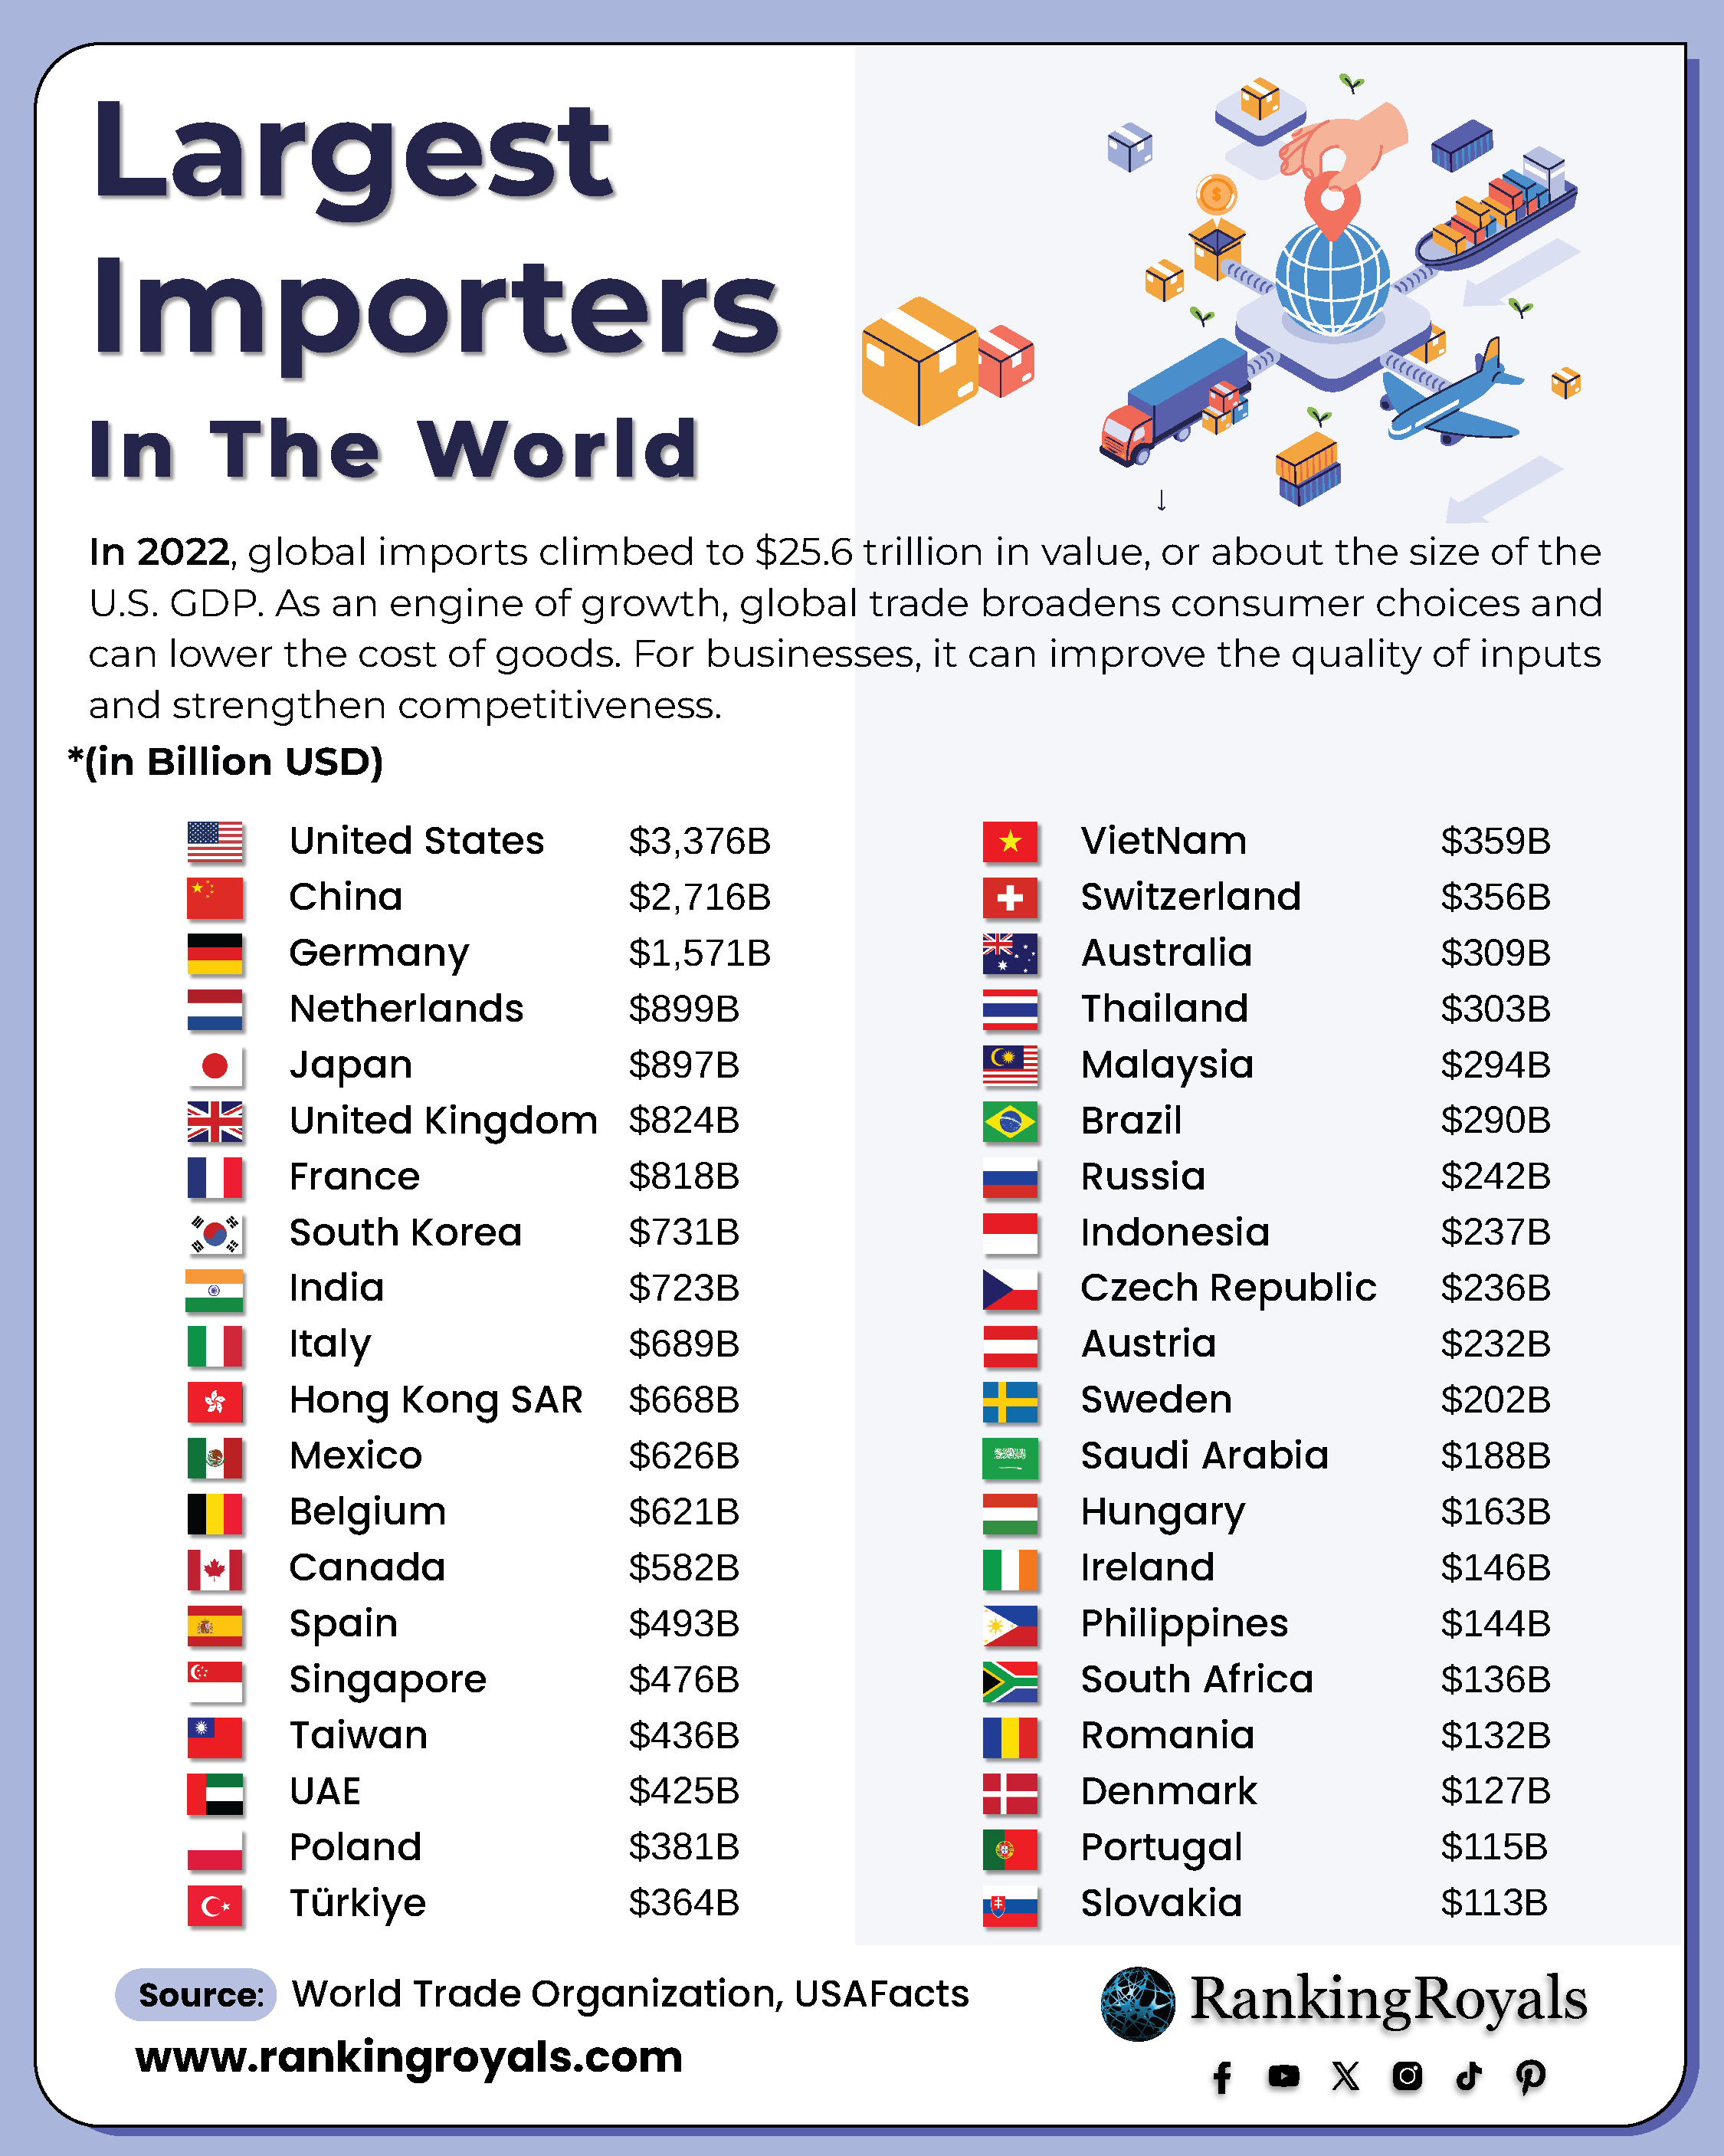 Largest importers in the world